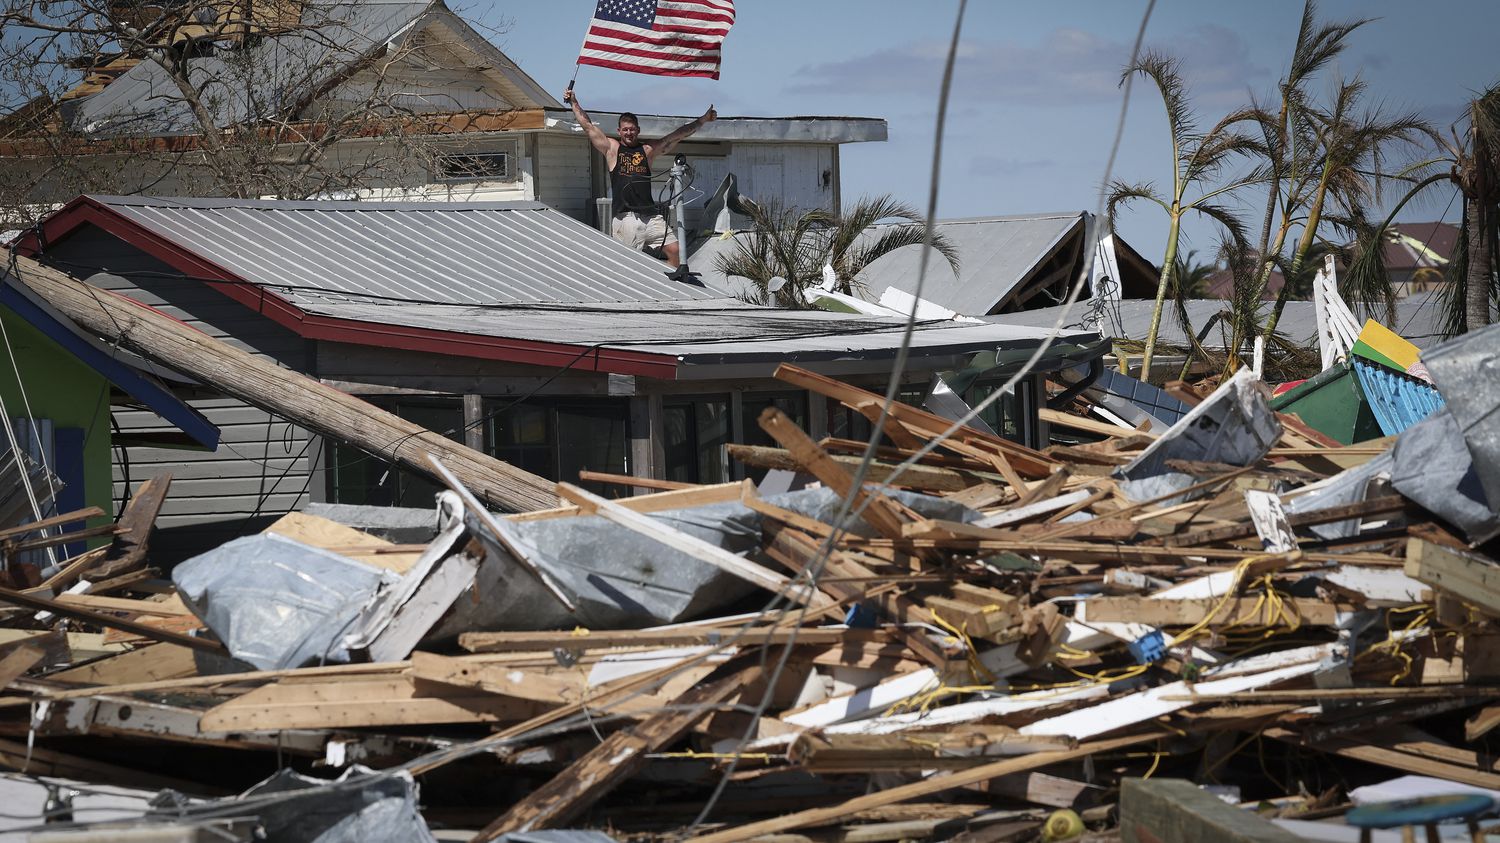 United States: Hurricane Ian kills at least 23 after passing through Florida
